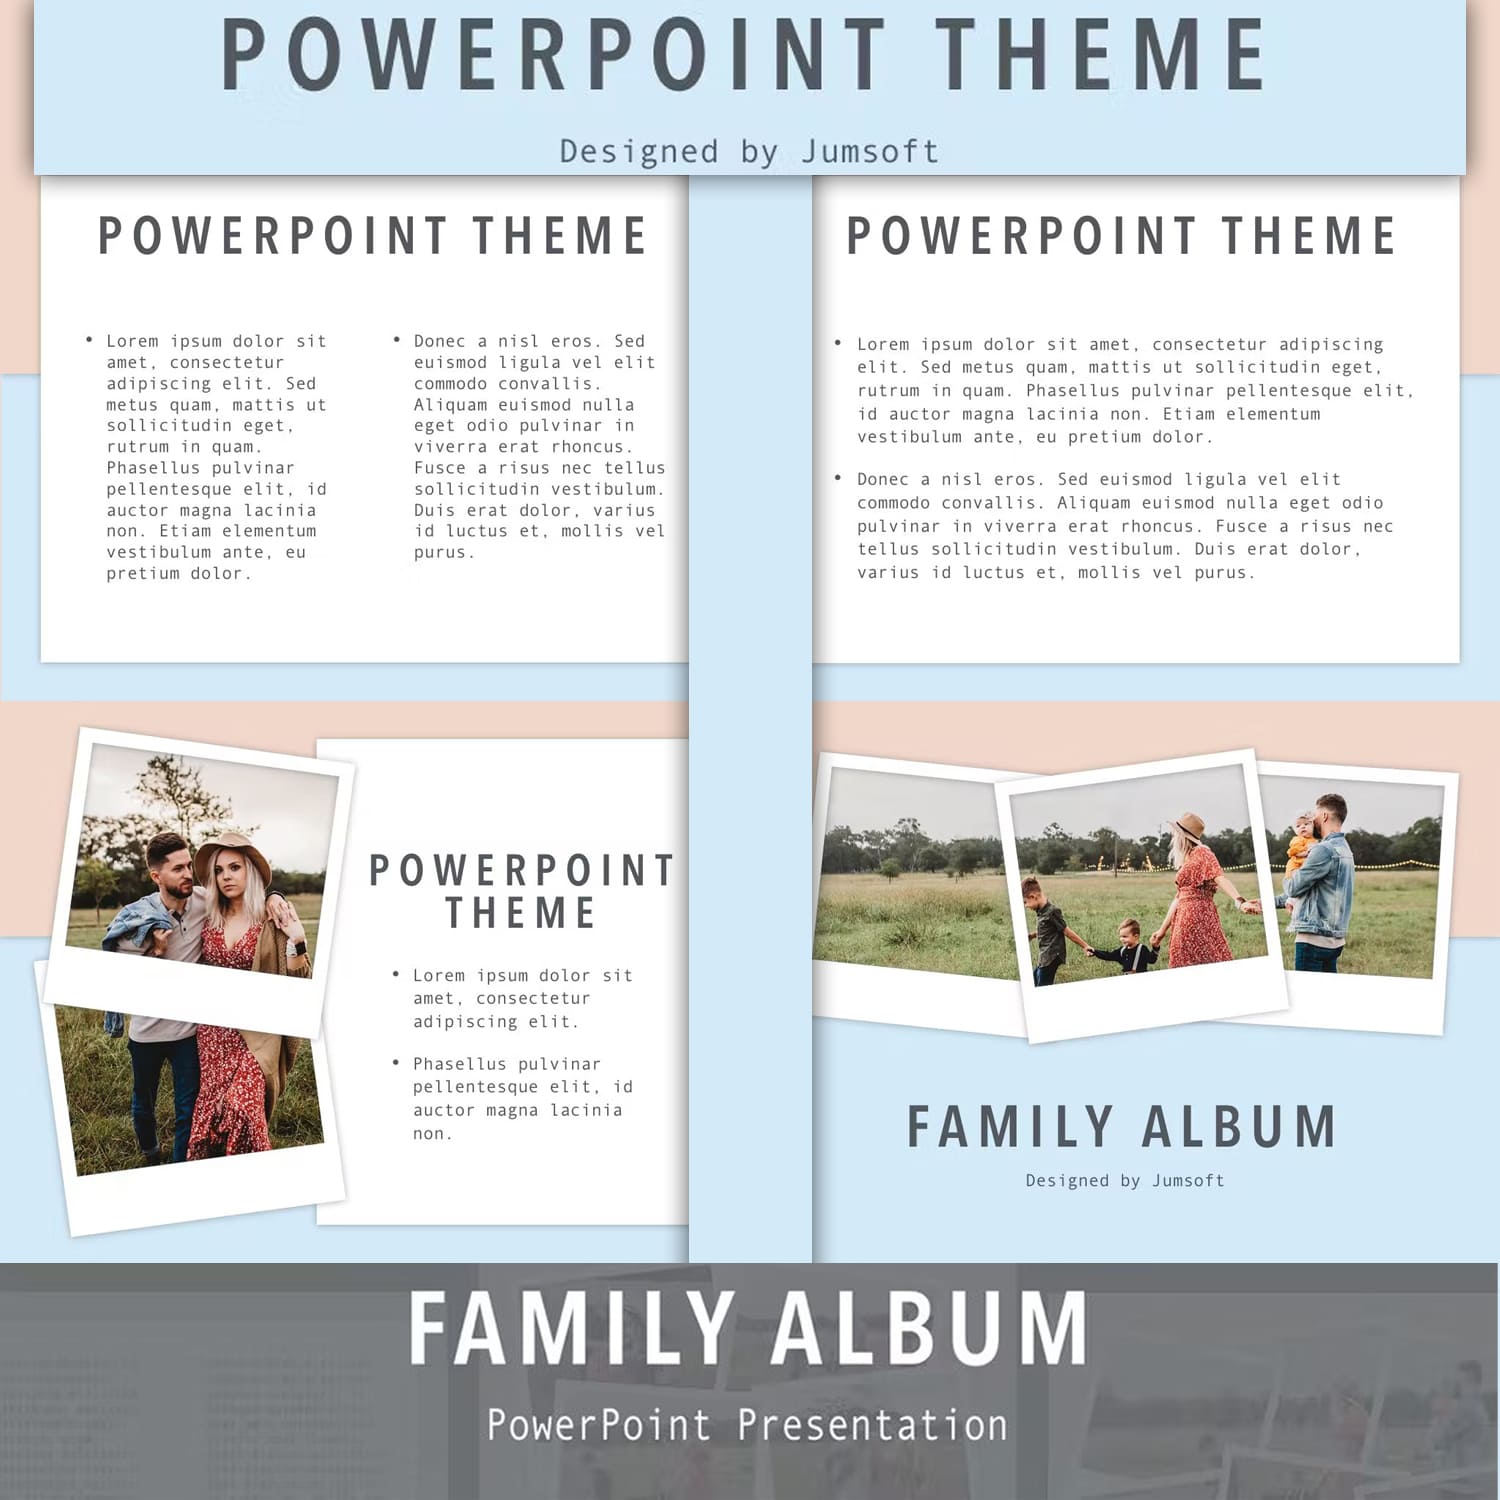 Family album powerpoint template - main image preview.